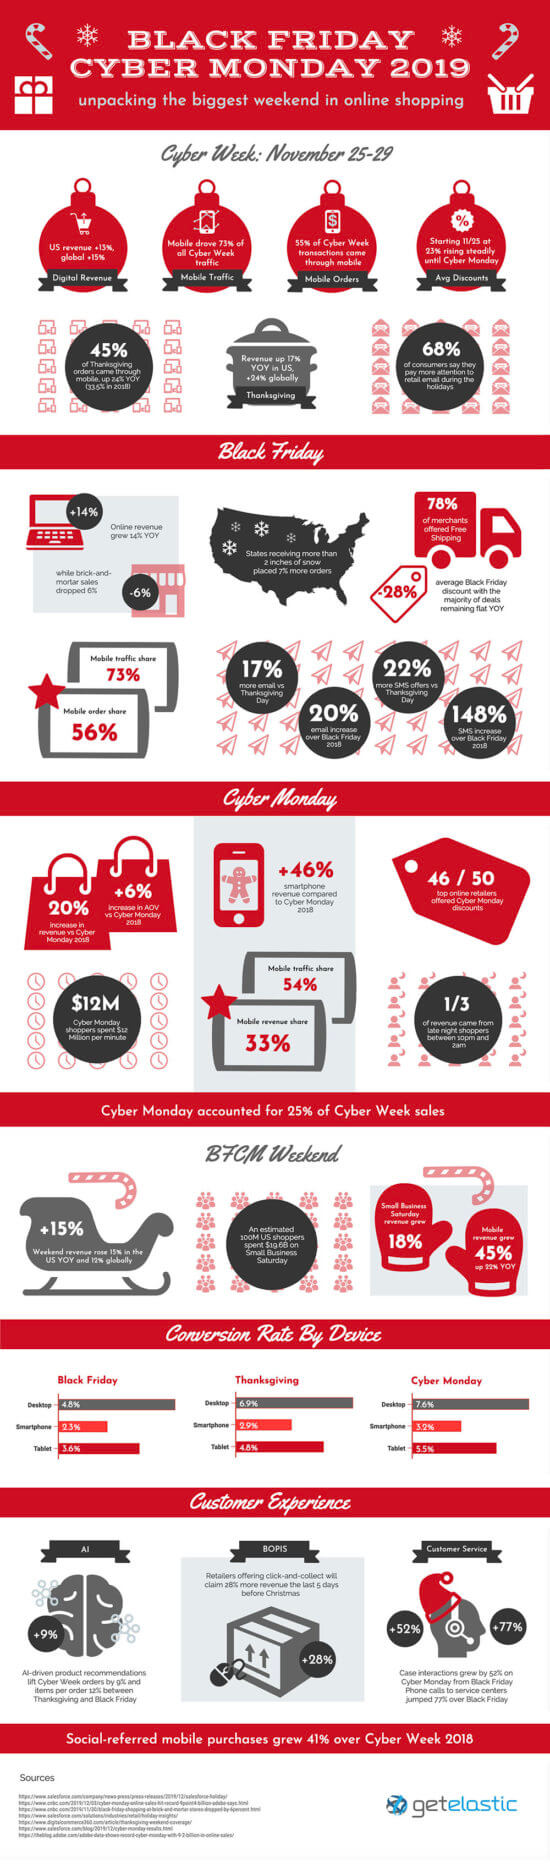 Black Friday Cyber Monday Results 2019 Infographic